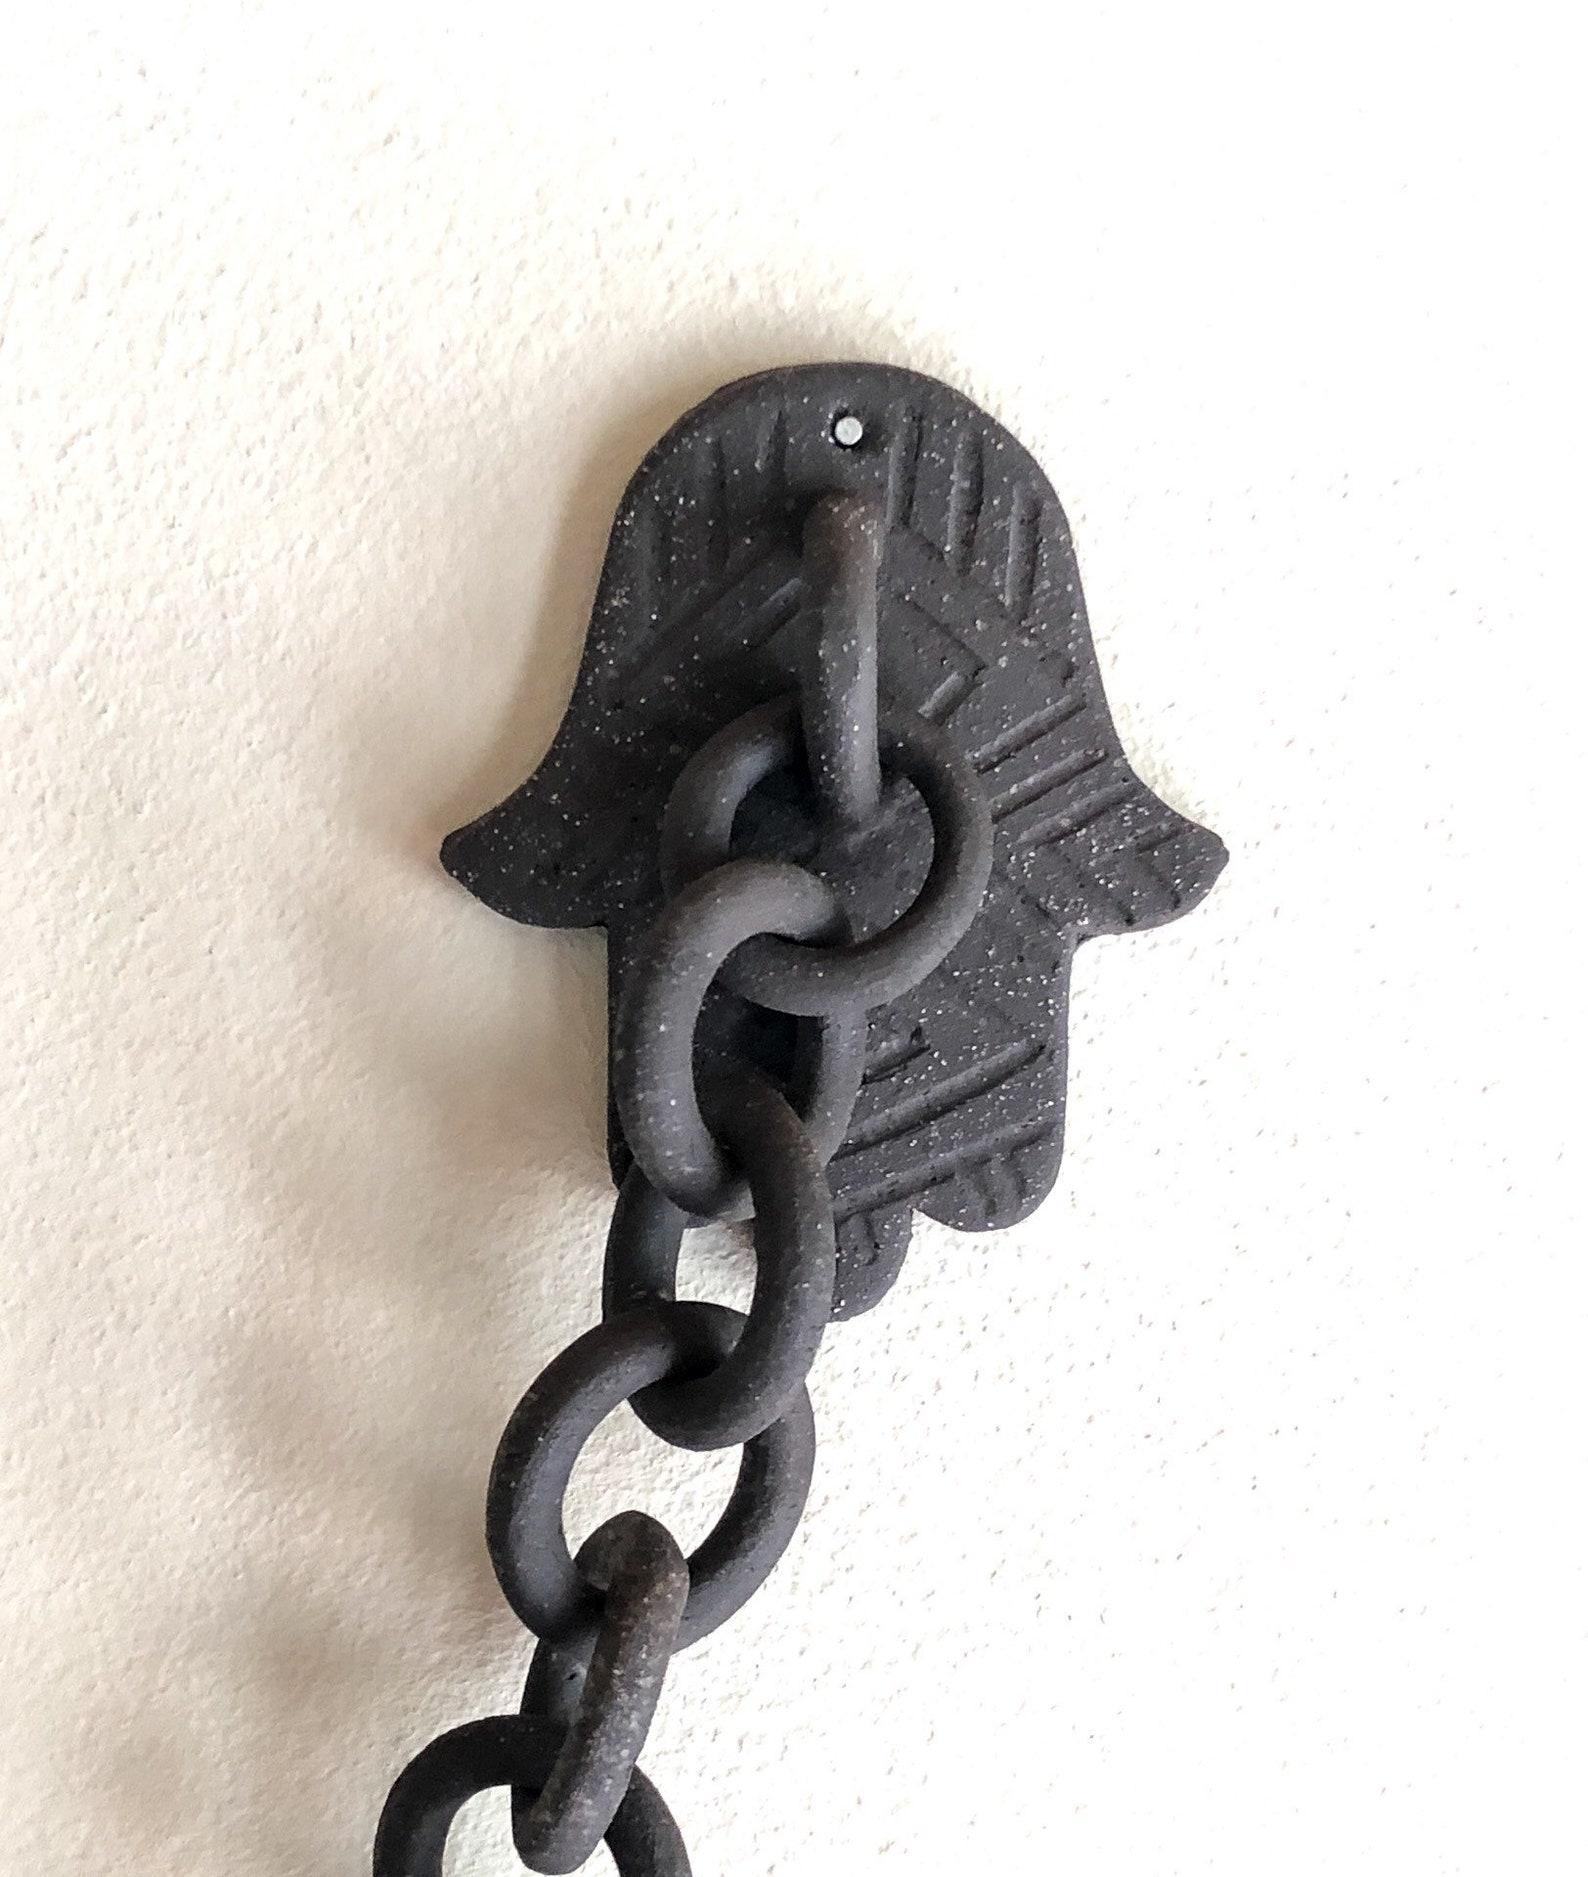 Organic Modern Ceramic Link Chain Wall Sculpture For Sale